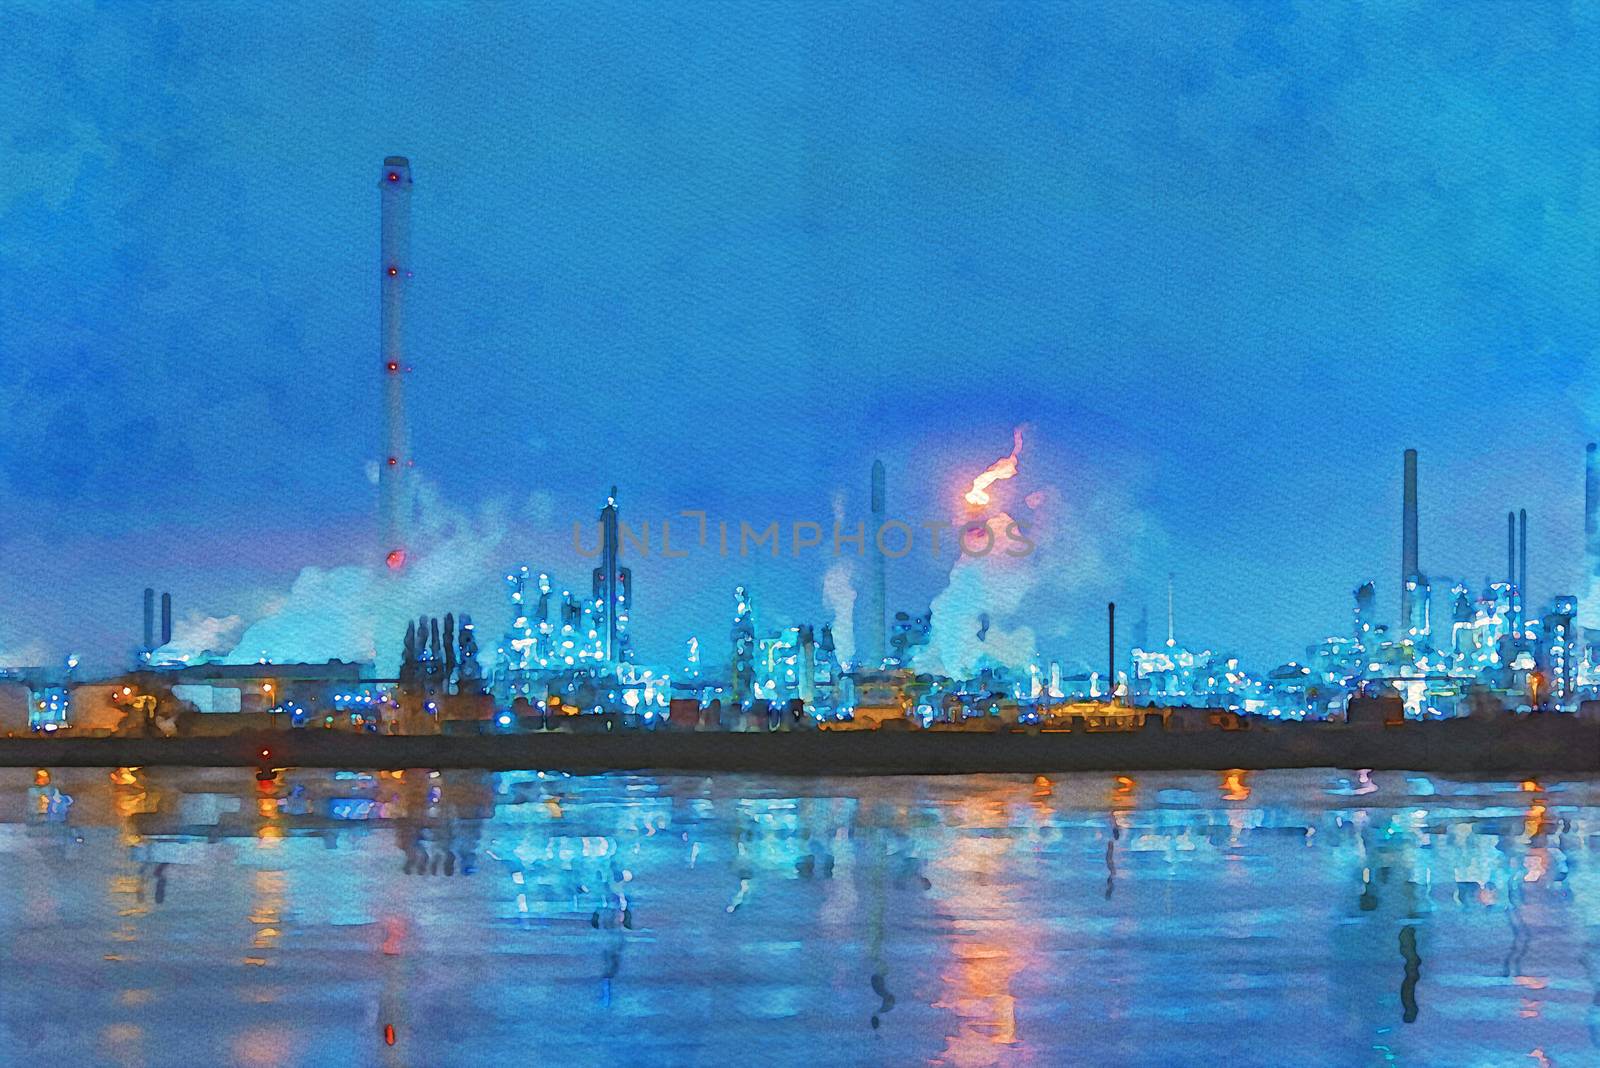 Digital watercolor painting of the refineries reflection and its chimney during the on fire sunset golden hour moment at Rotterdam, Netherlands by ankorlight